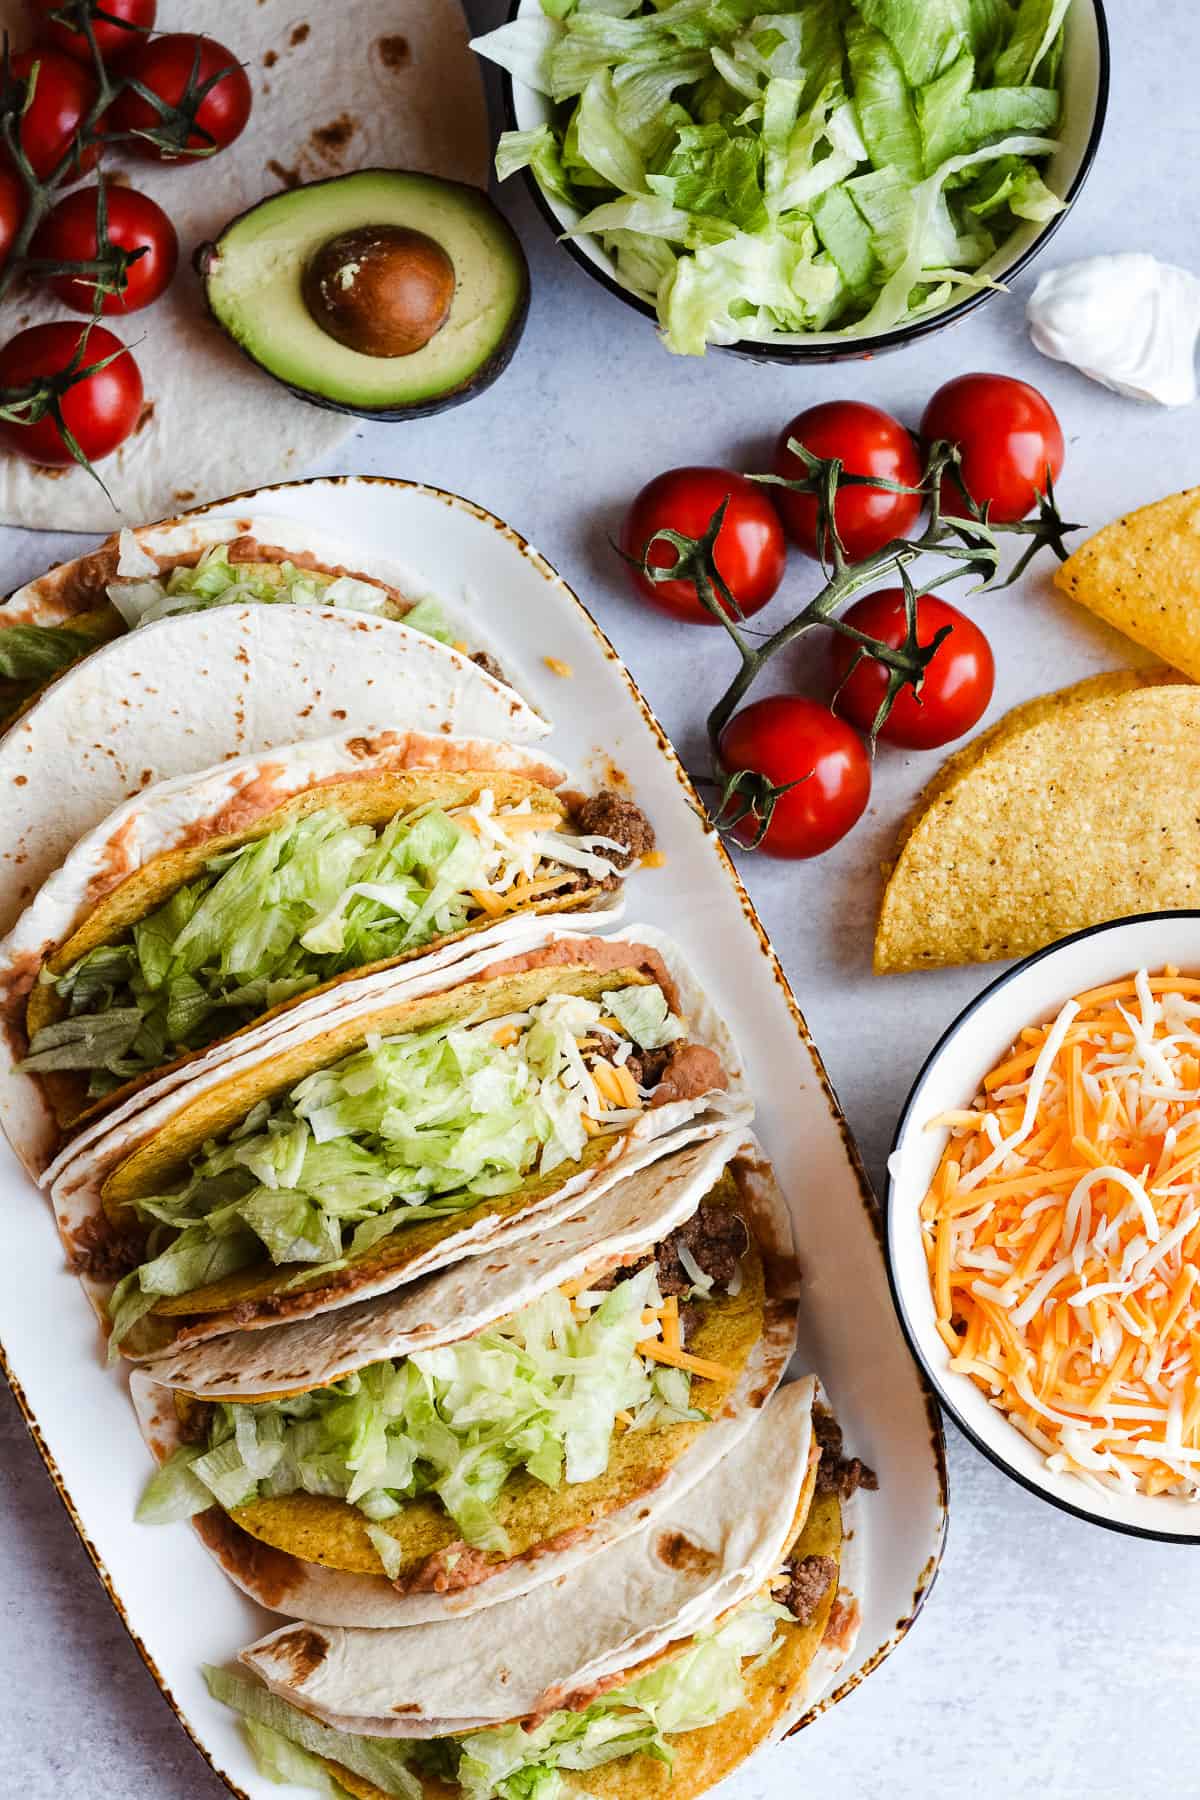 Plate of double decker tacos lined up with tomatoes, avocados and cheese around.